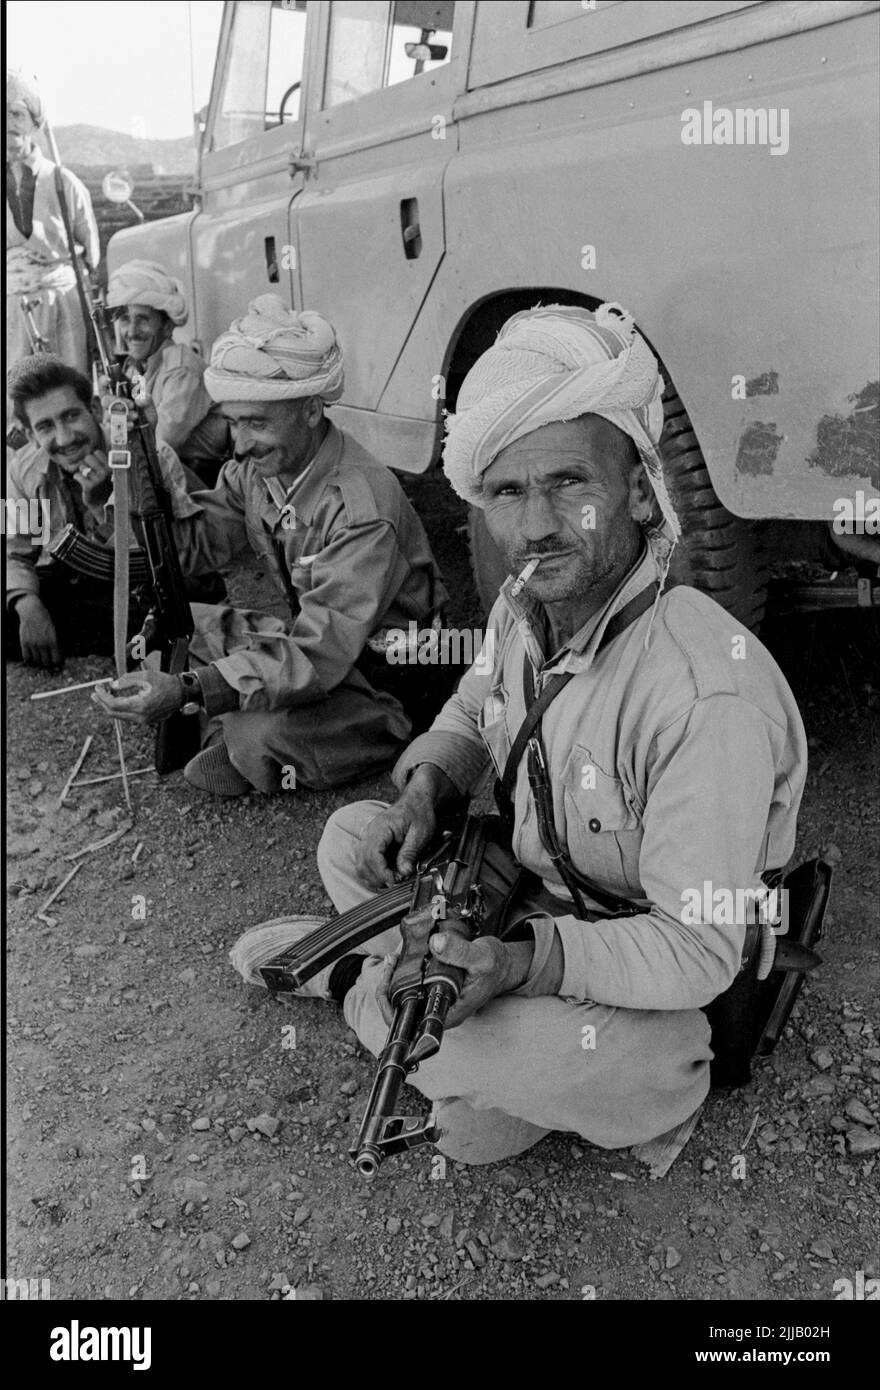 Kurdish peshmerga guerillas in the mountains of Northern Iraq, led by the independence fighter Mustafa Barzani, during a brief truce with the Iraqi government. 1969.  Journalist Logan Gourlay and I flew in Russian military helicopters of the Iraqi air force. The government wanted to show that they were not at war with the Kurds. I Stock Photo